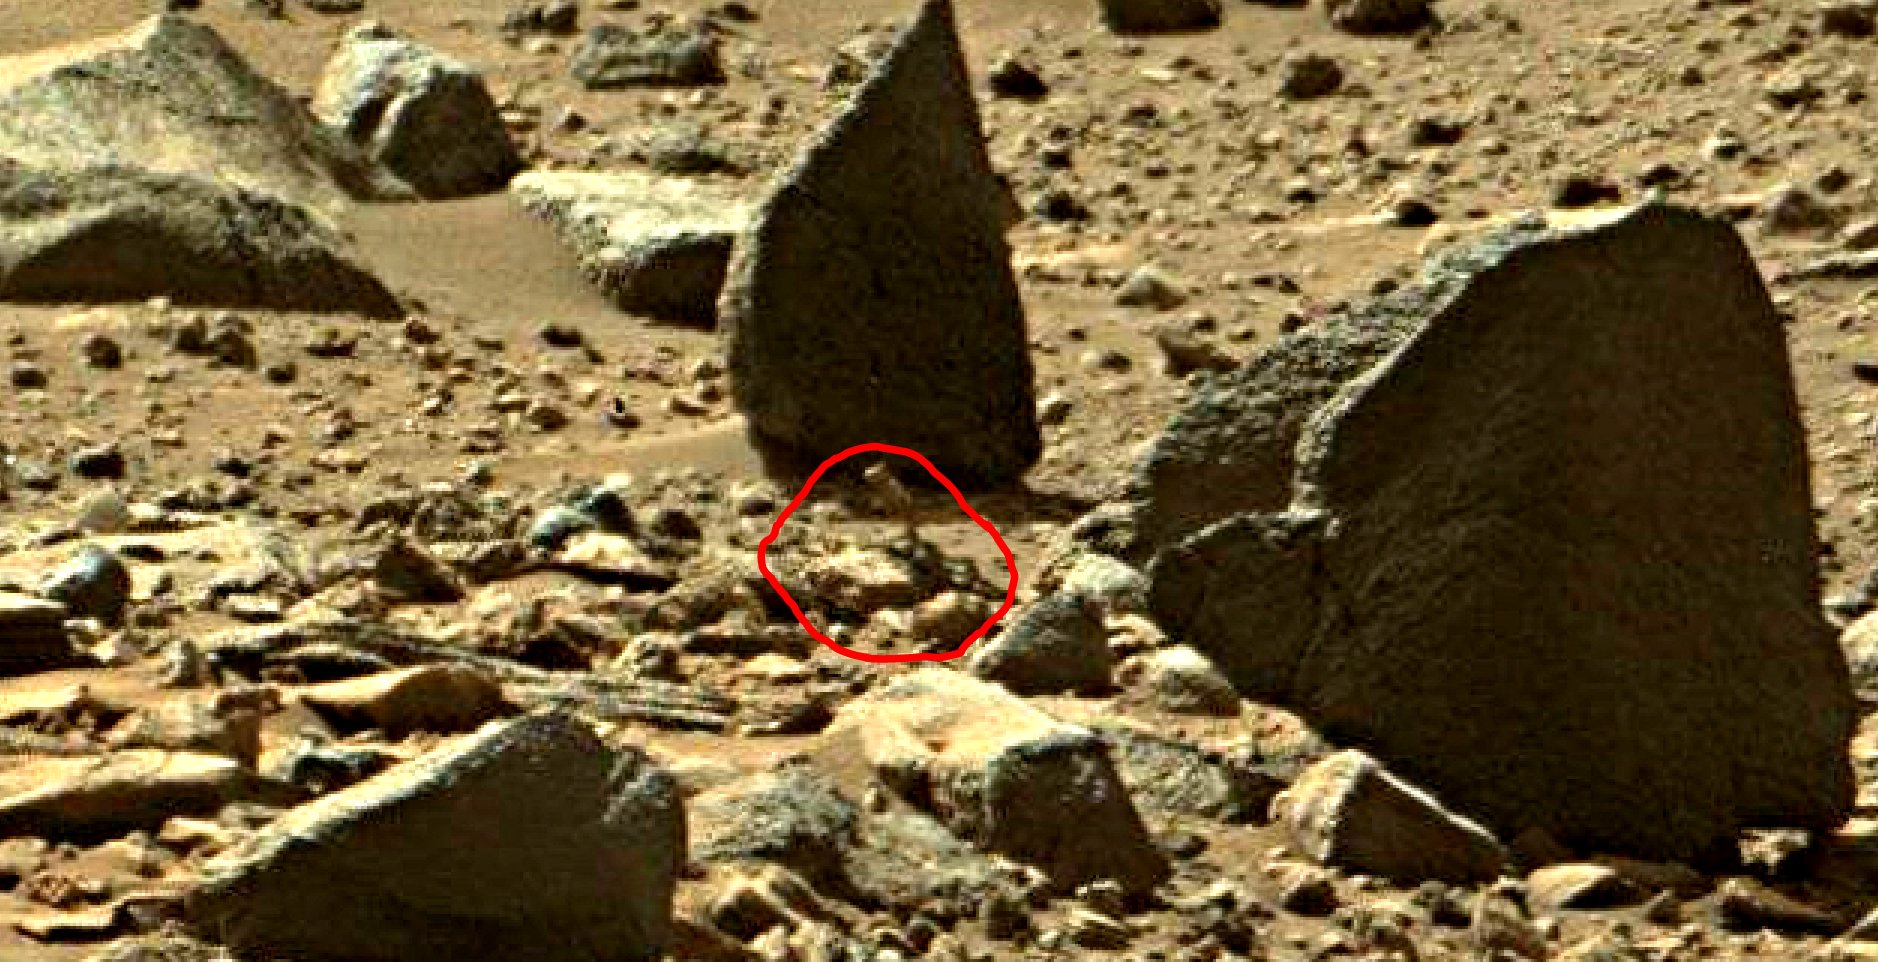 mars sol 1405 anomaly artifacts 12 was life on mars